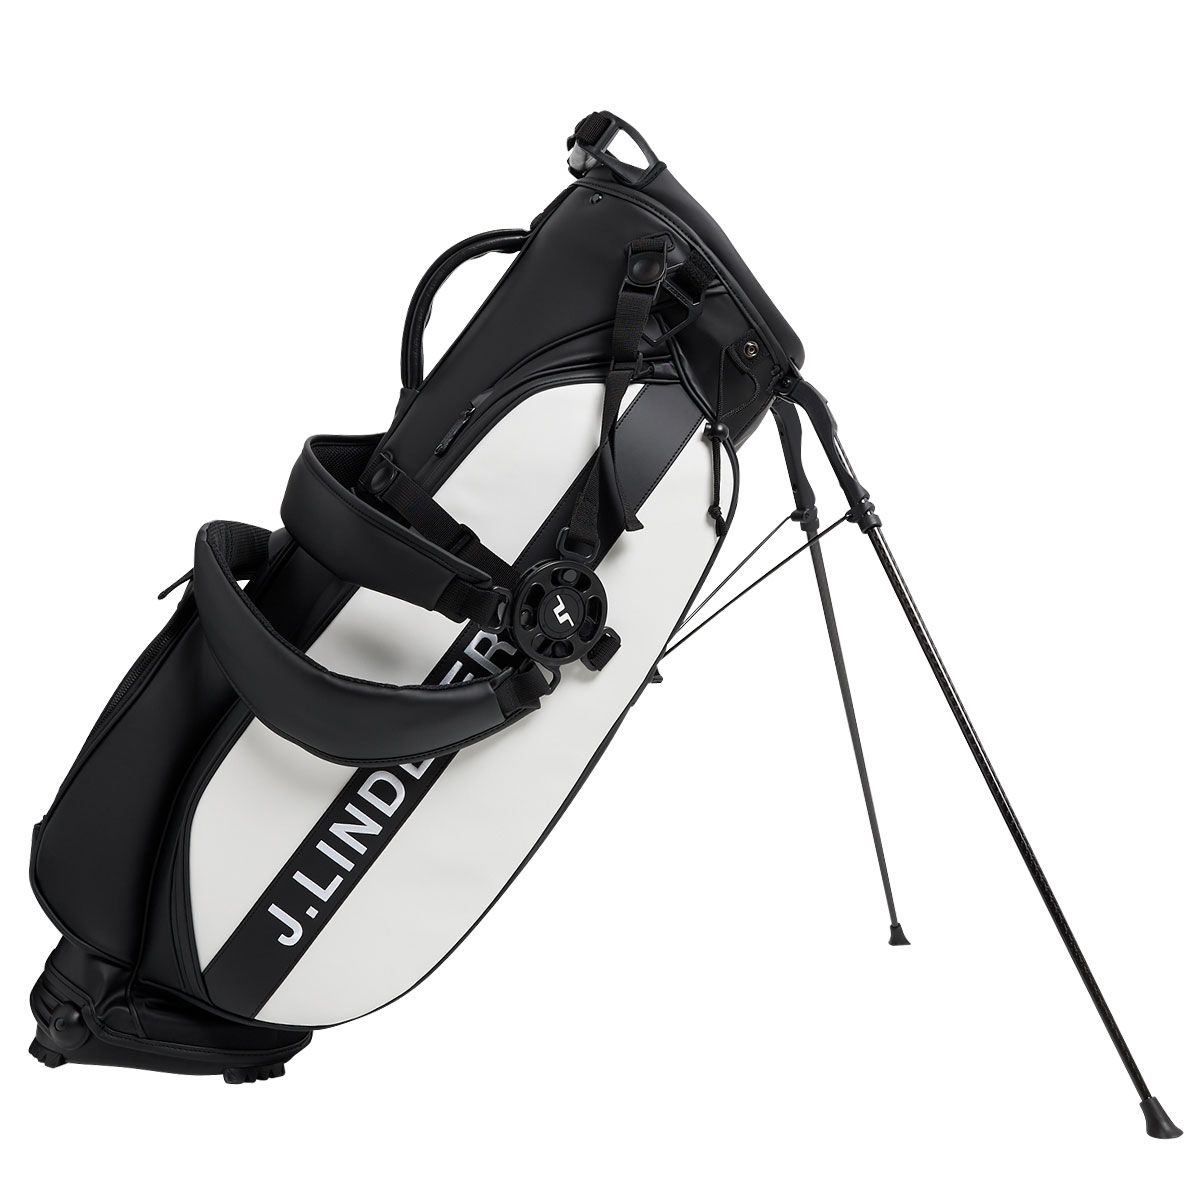 J.Lindeberg Play Golf Stand Bag from american golf